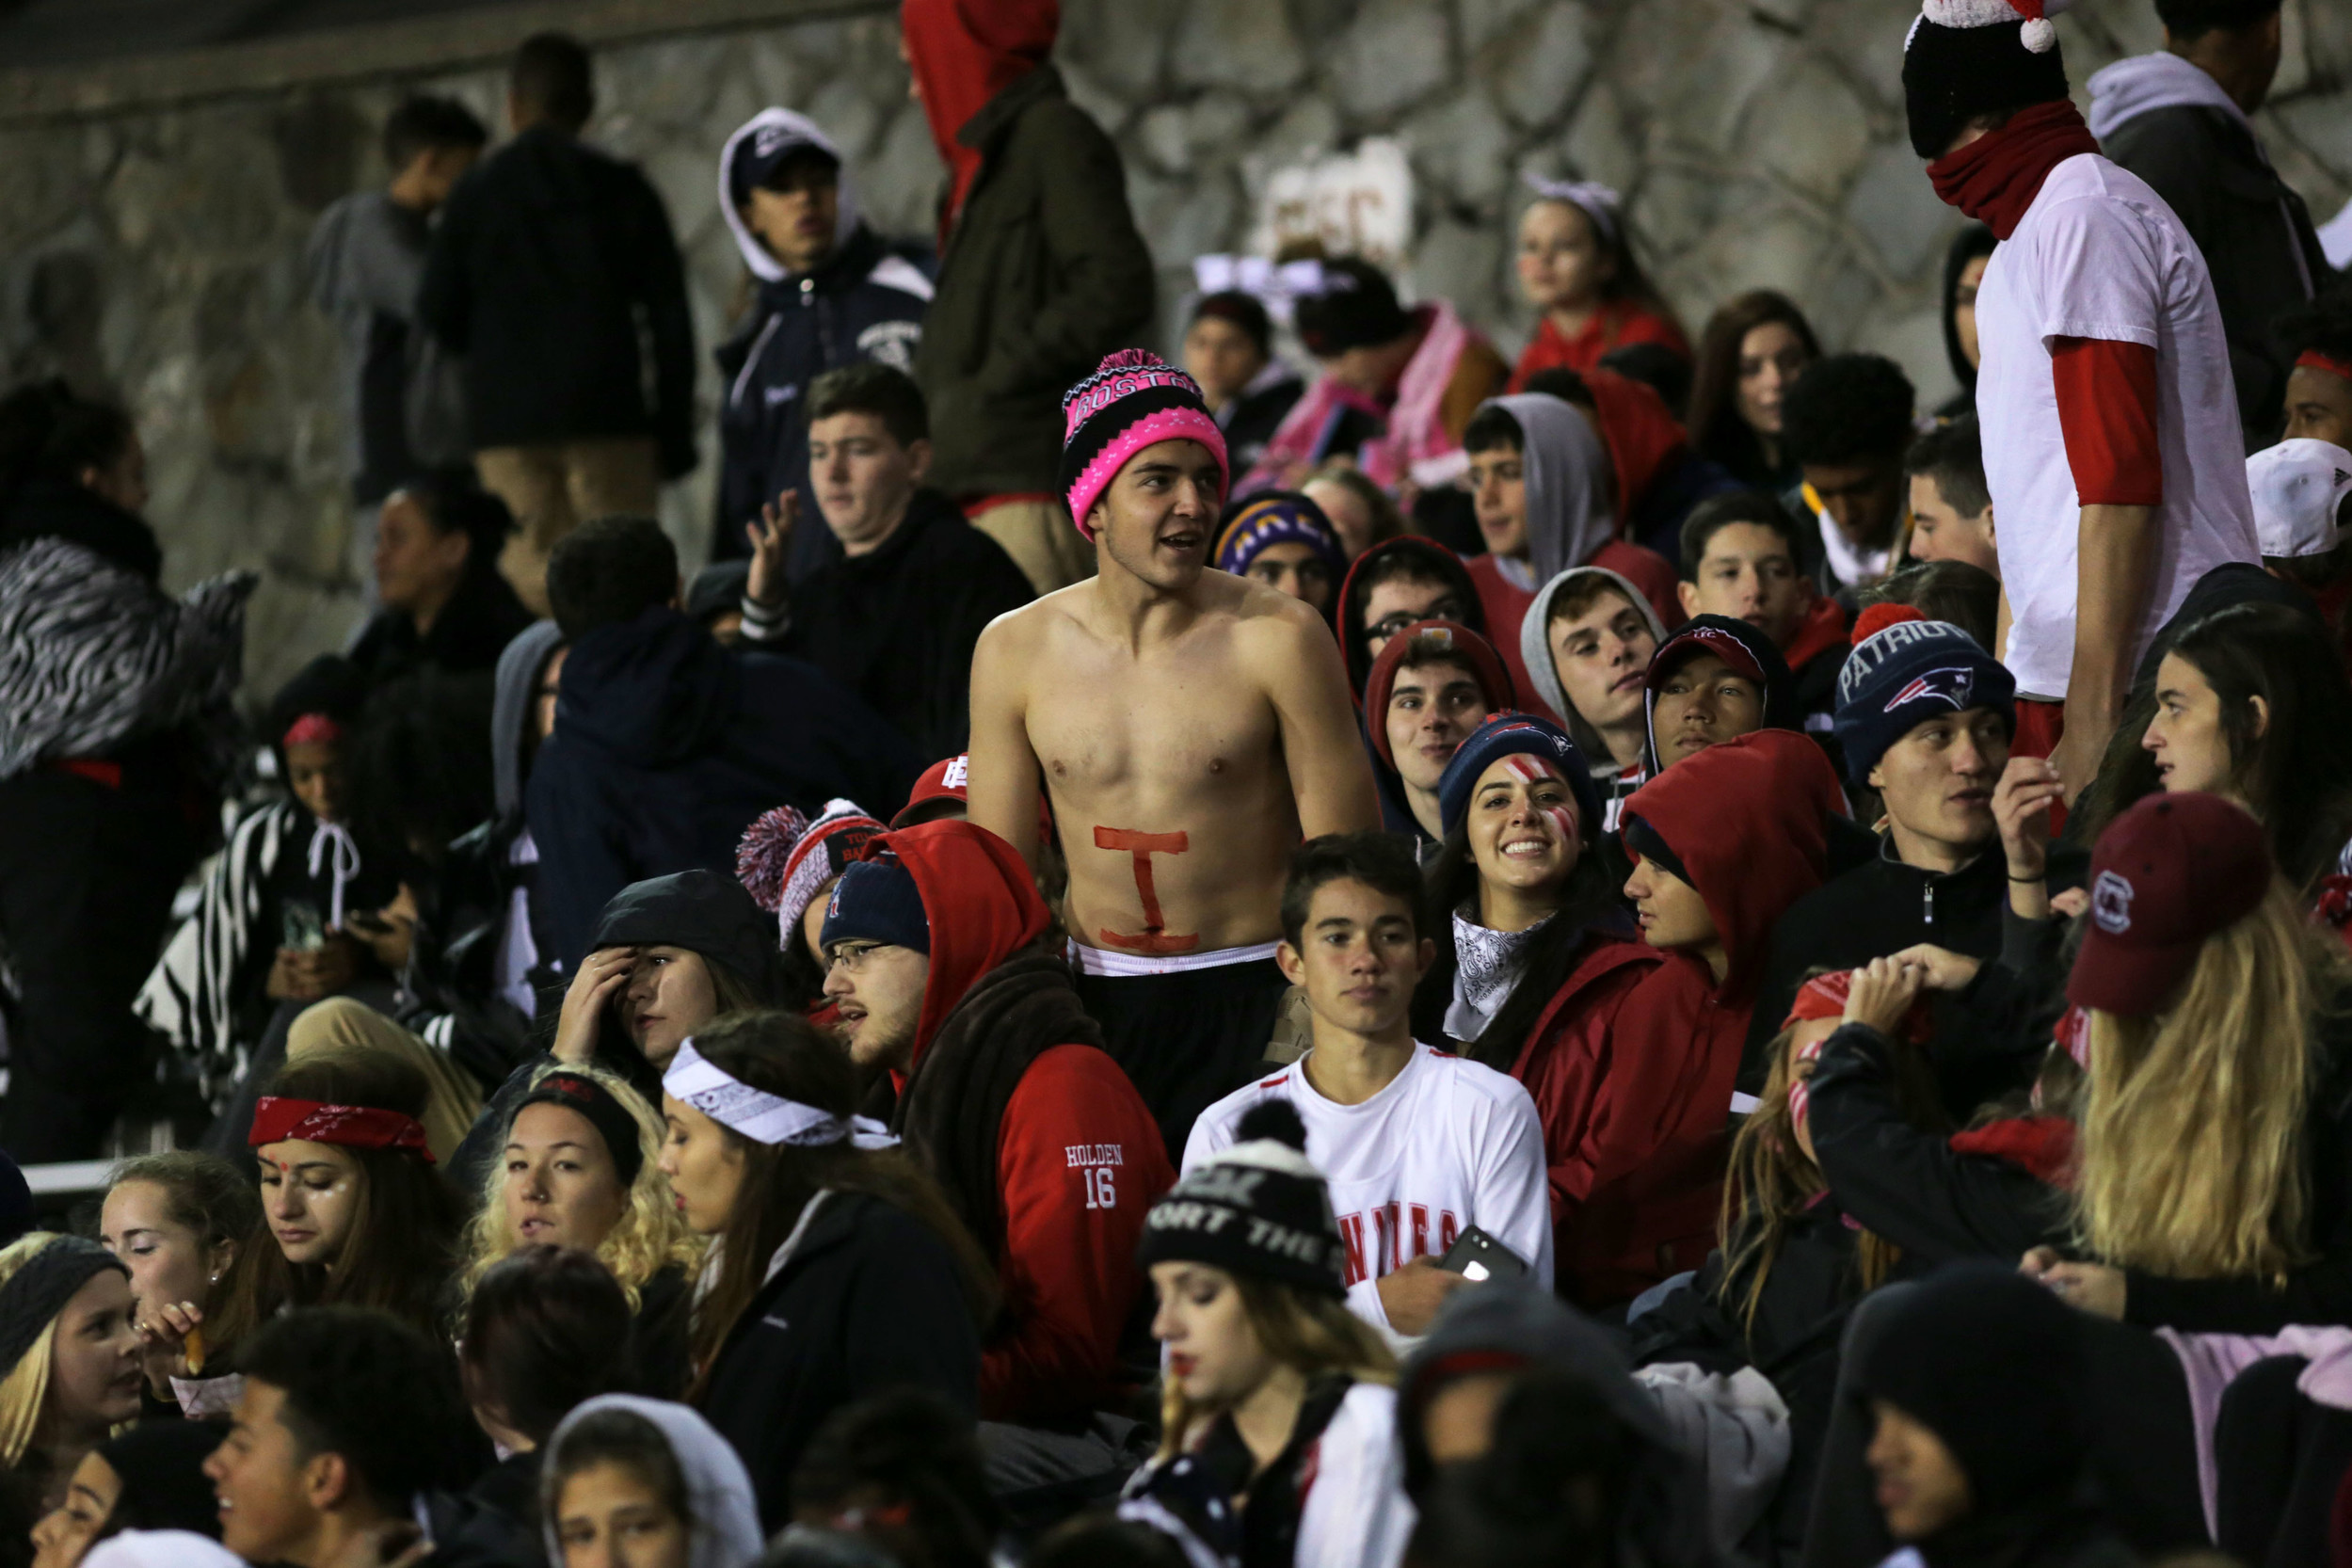 An East Providence fan uses his Townie pride to stay warm.